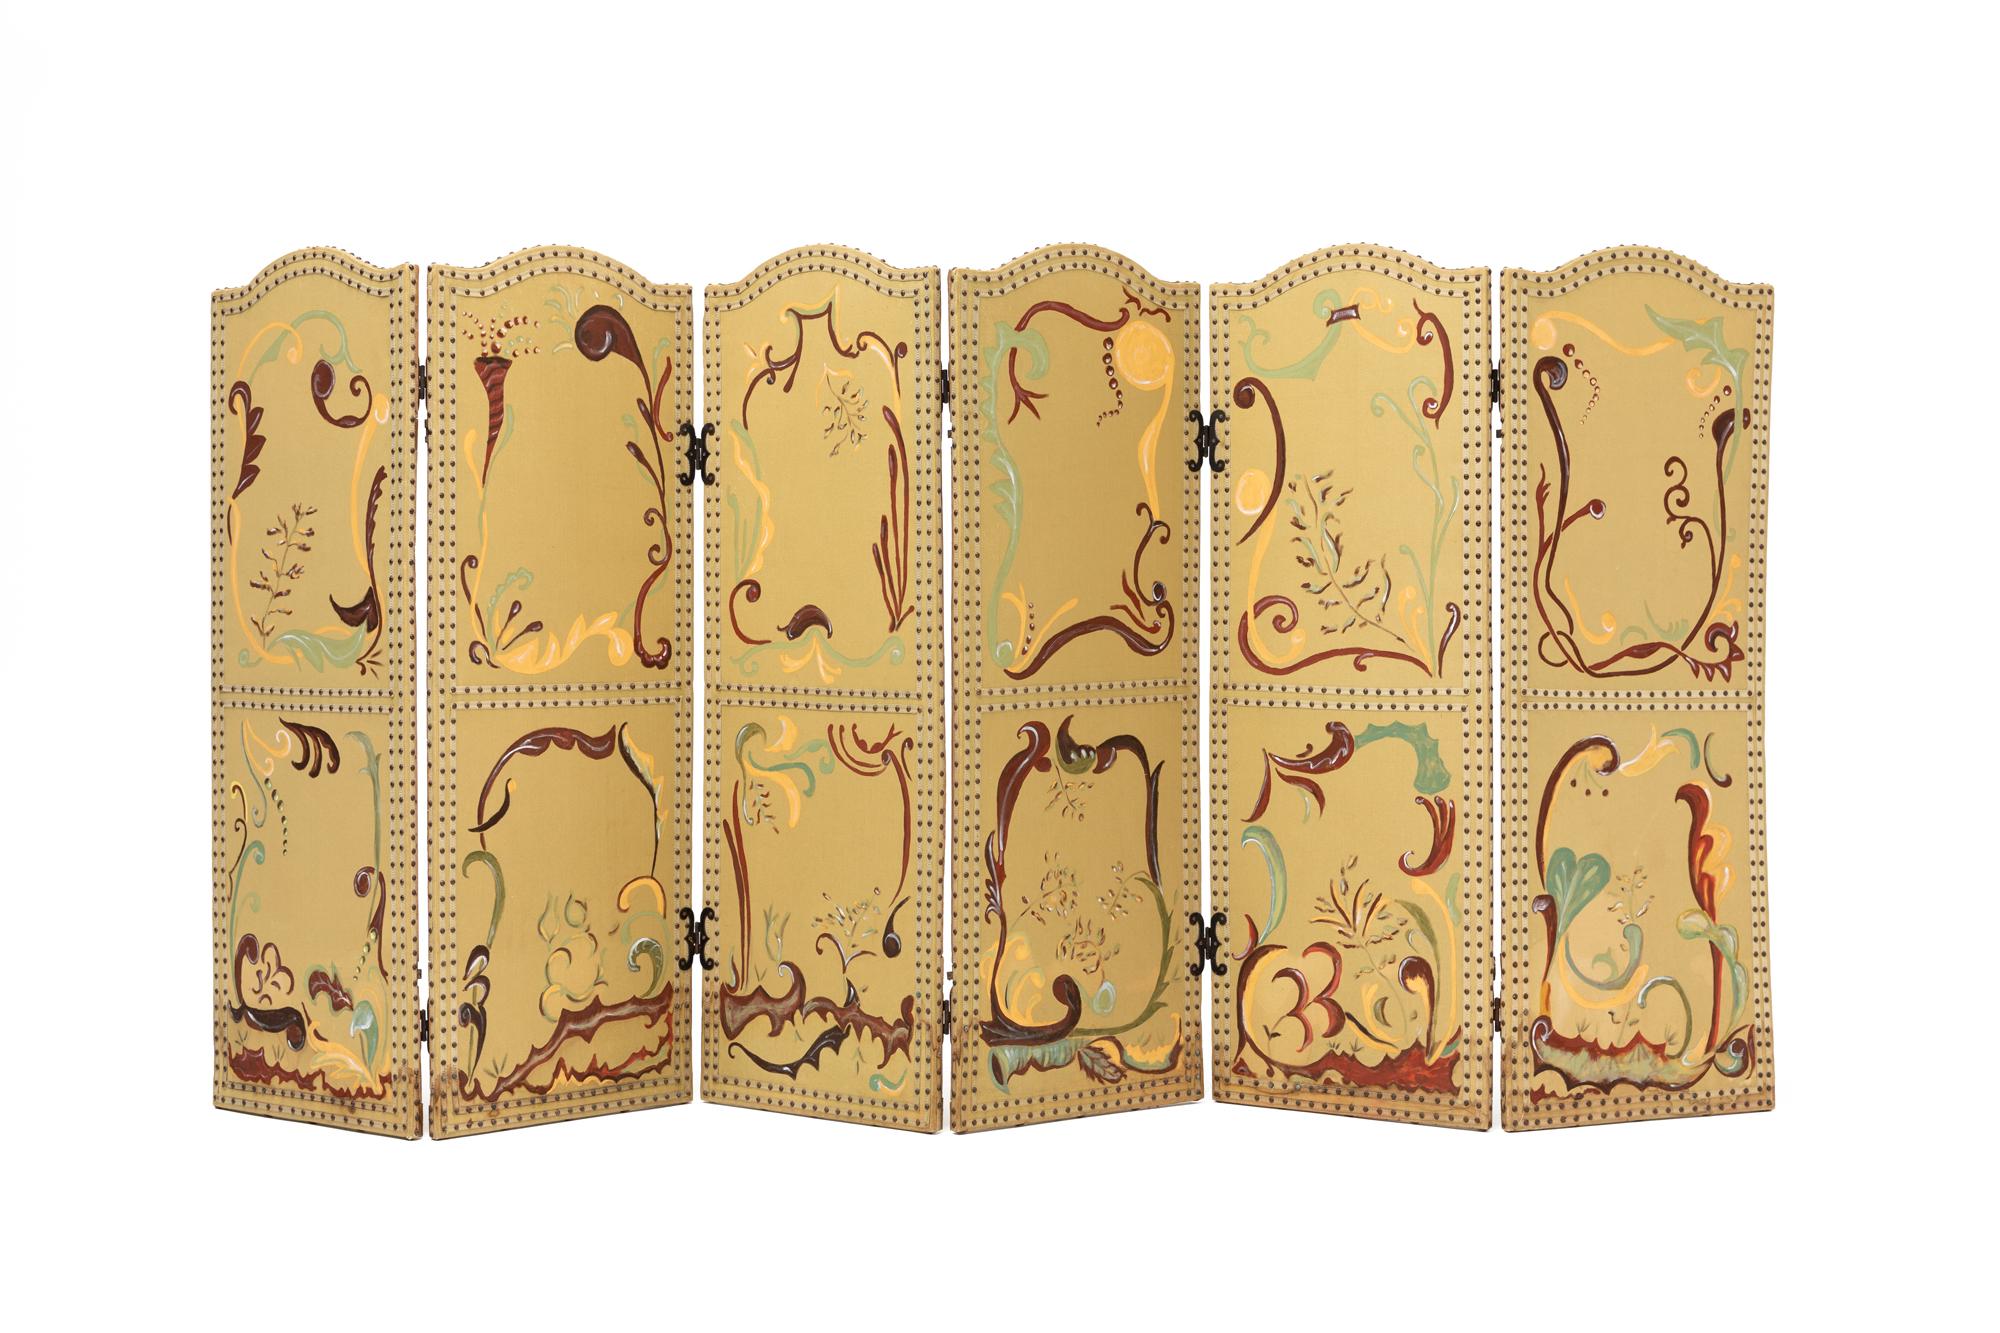 Six-Panel Folding Screen, Painted Fabric with Nailhead Trim, Wooden Structure